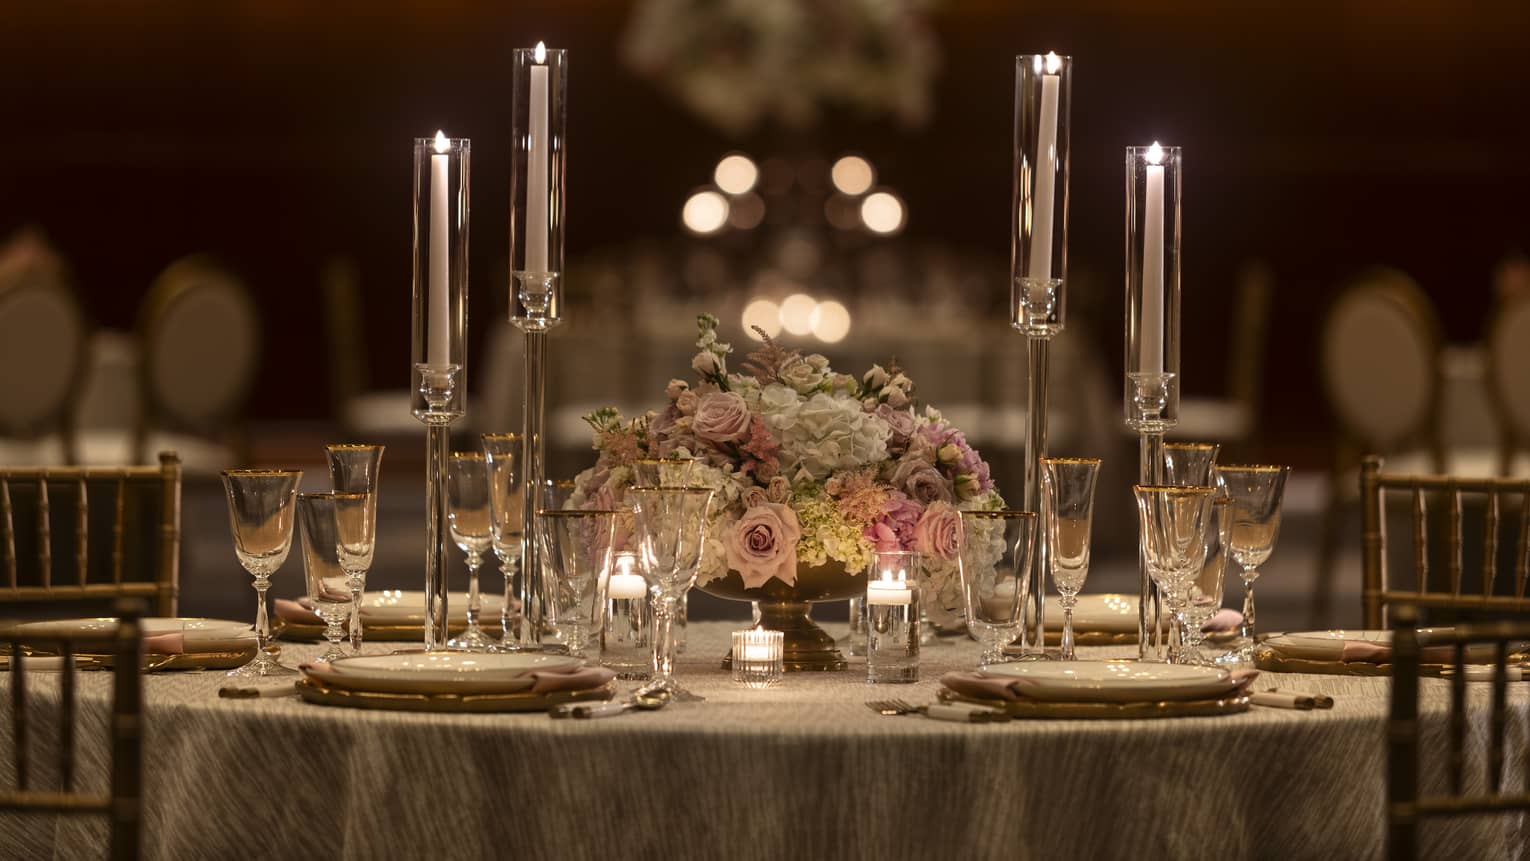 A table with candles, flowers, and table settings.